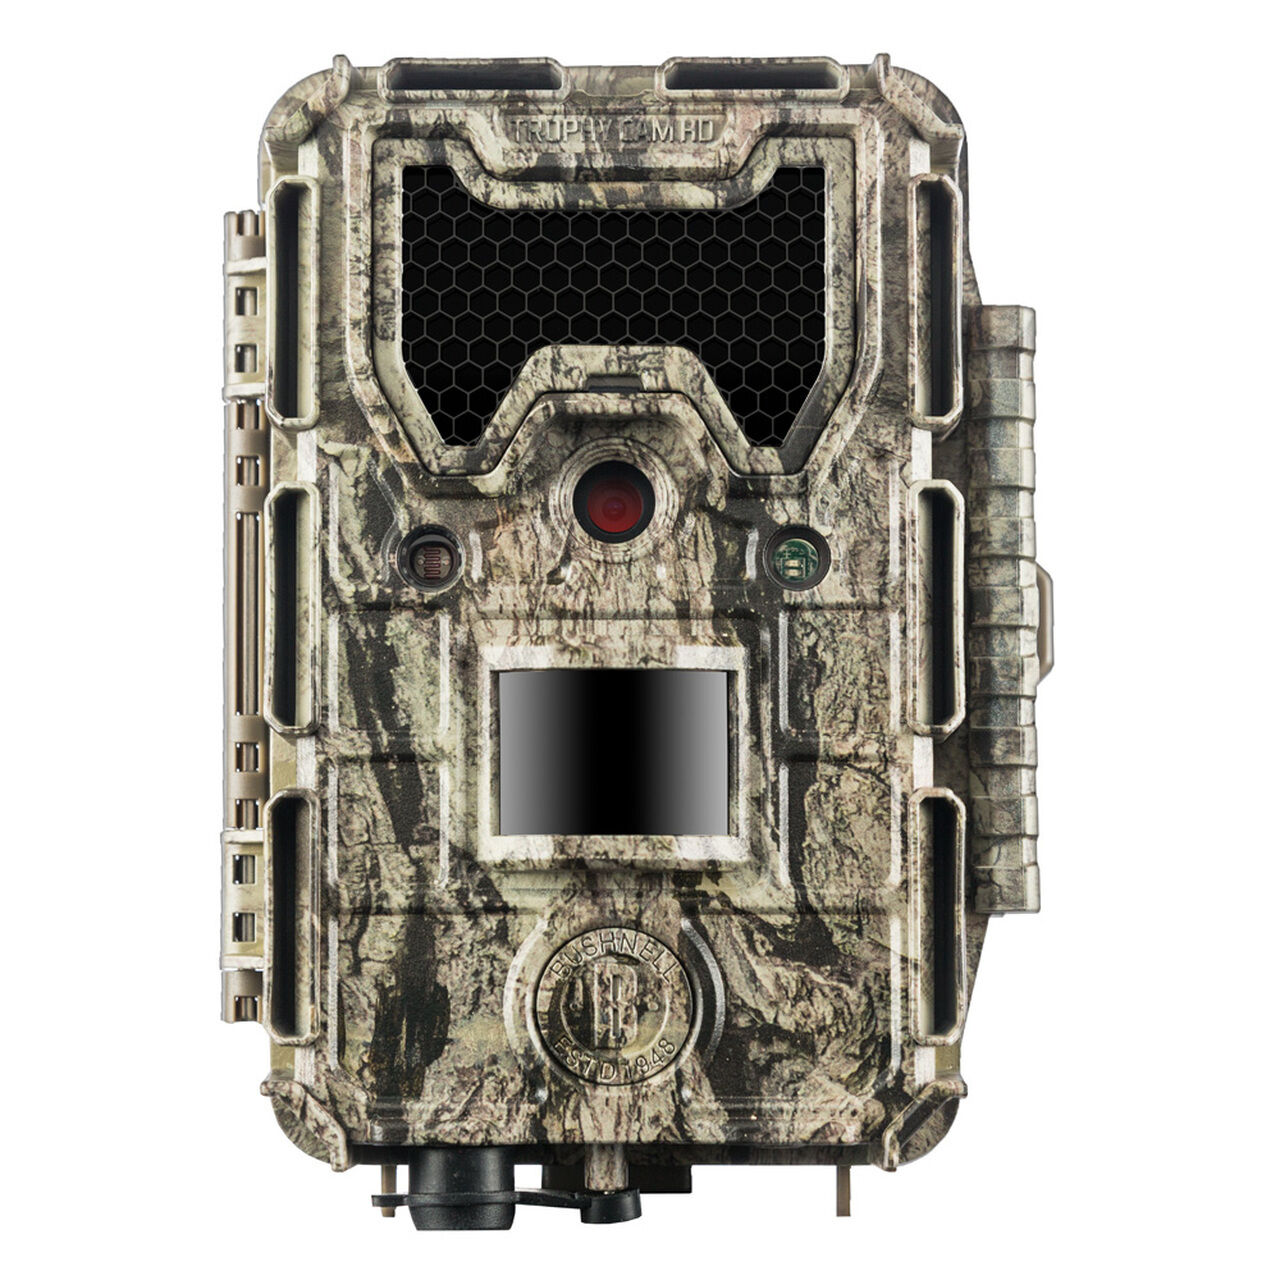 Bushnell Trophy Cam HD 24 MP Trail Camera Low Glow Infrared LEDS 